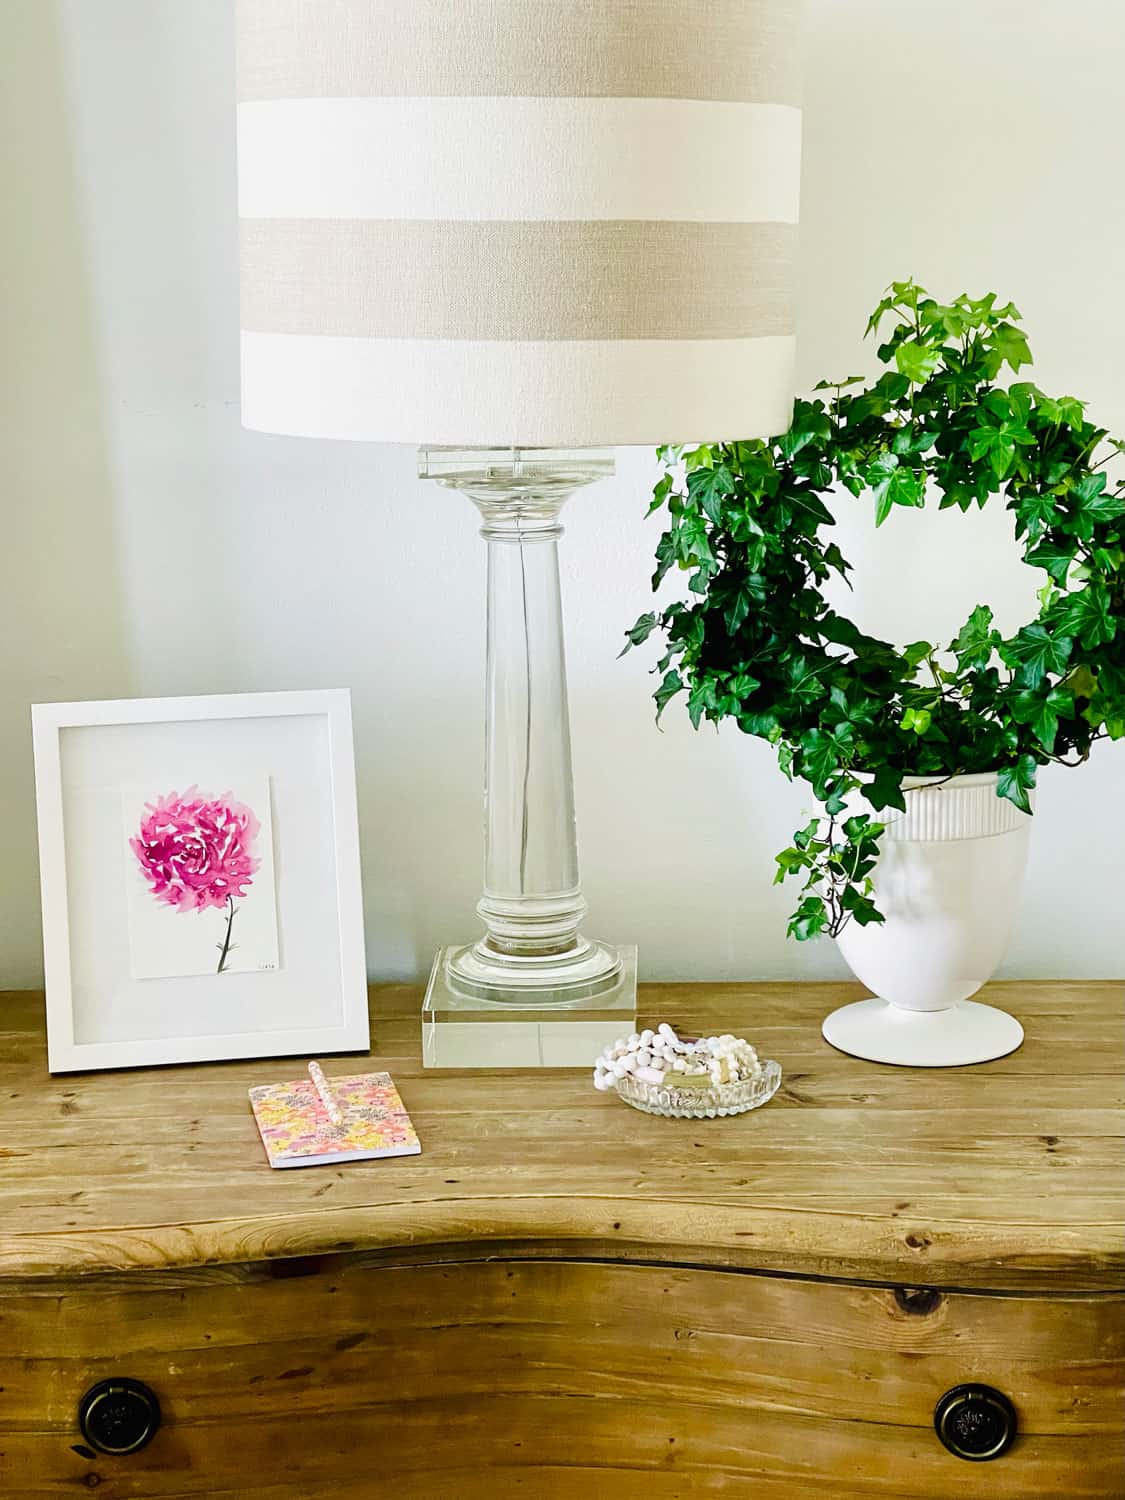 Bedside table styling by Mary Ann Pickett